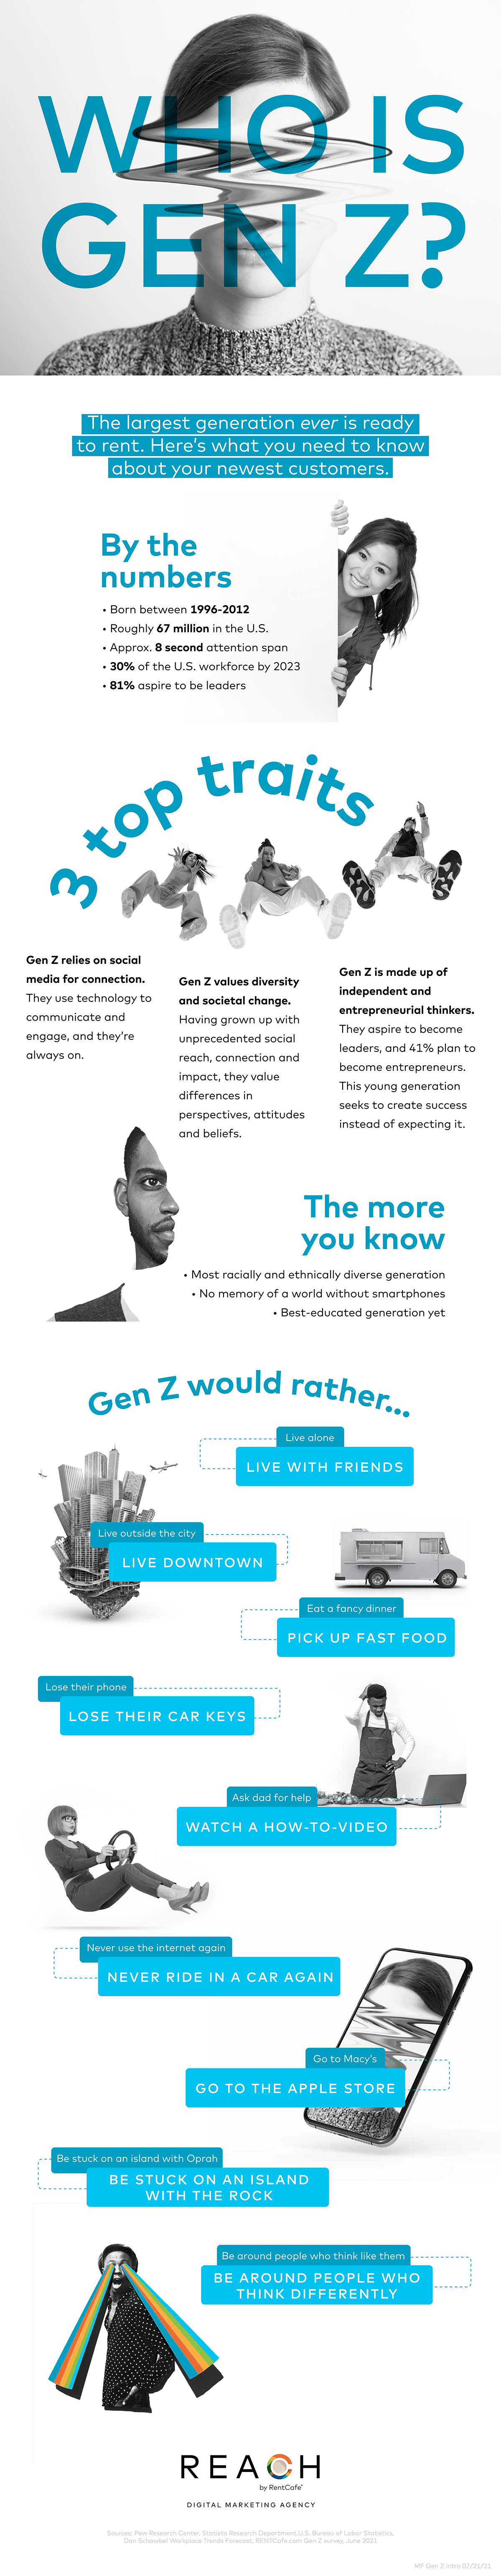 Infographic featuring Gen Z characteristics and data